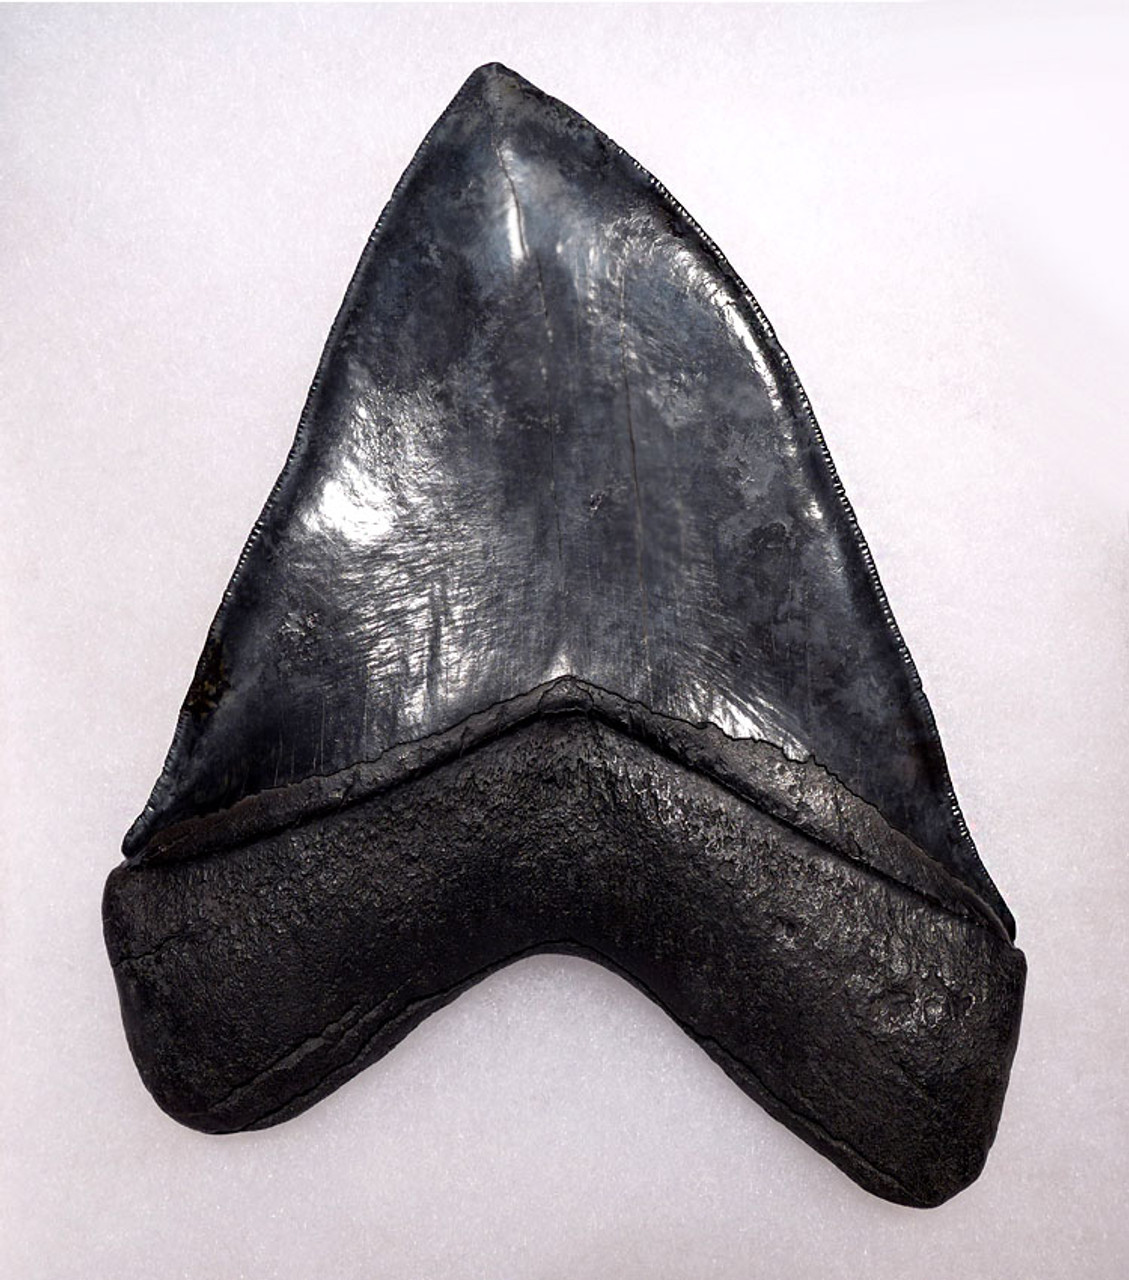 SH6-349 -  INVESTMENT CLASS NEARLY 6 INCH MEGALODON SHARK TOOTH WITH MIDNIGHT BLACK MOTTLED ENAMEL